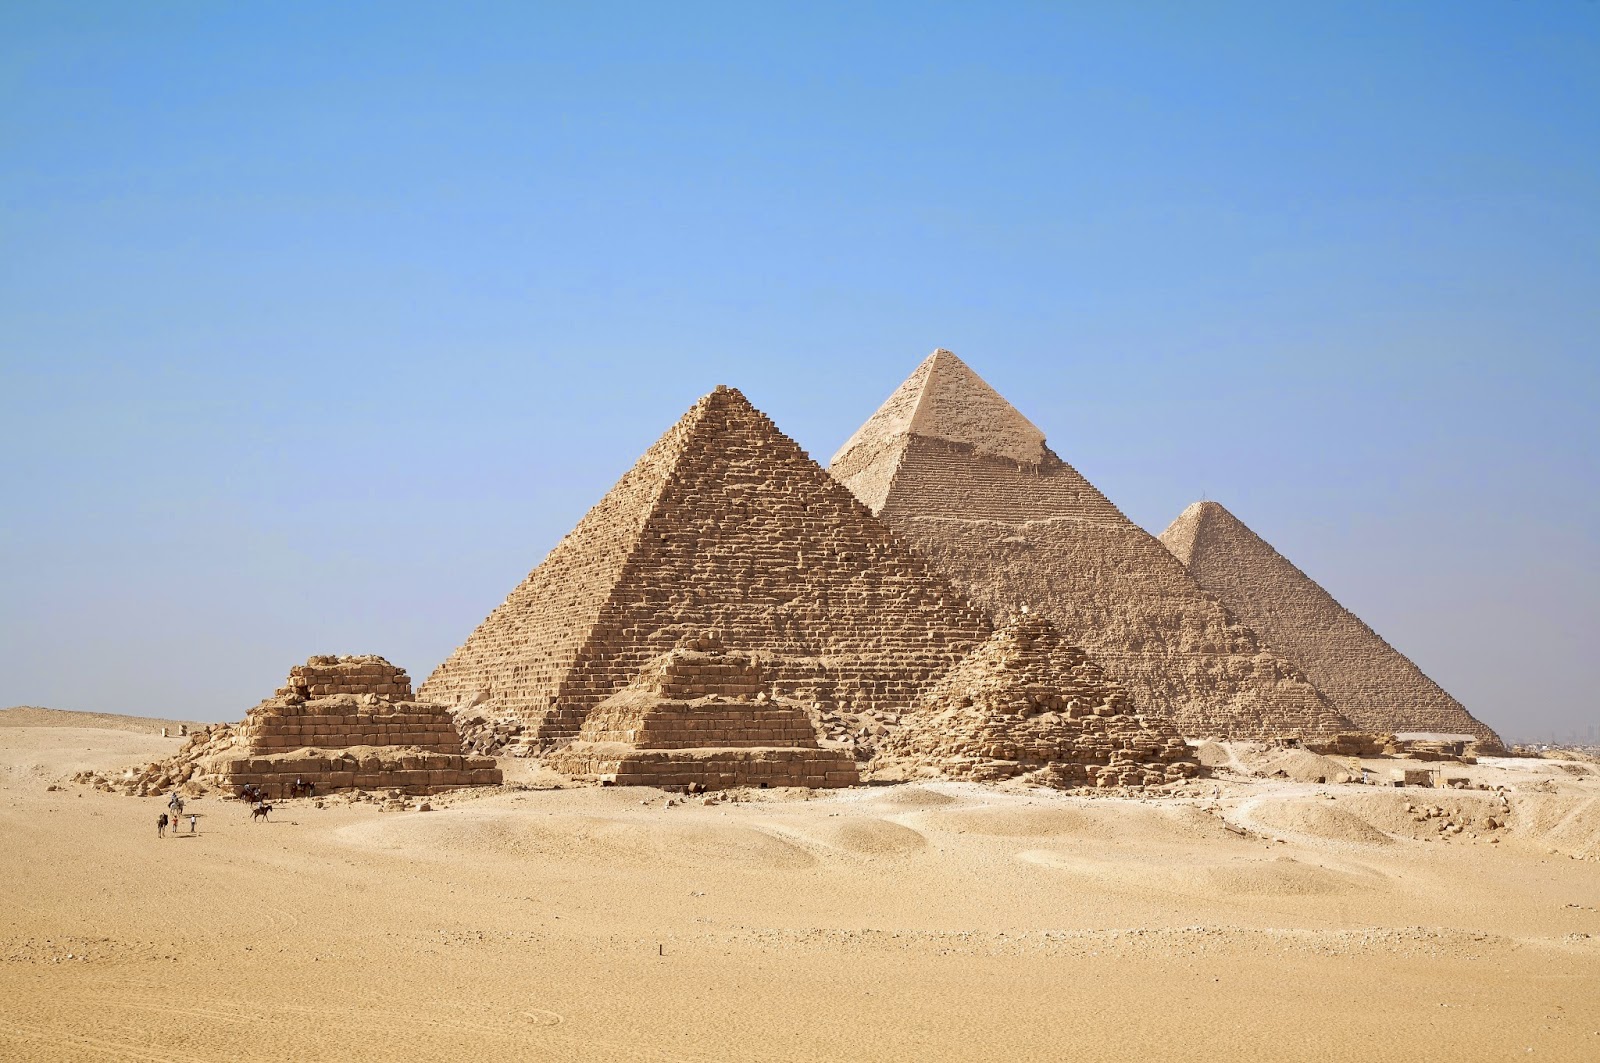 http://www.google.com/intl/es/maps/about/behind-the-scenes/streetview/treks/pyramids-of-giza/